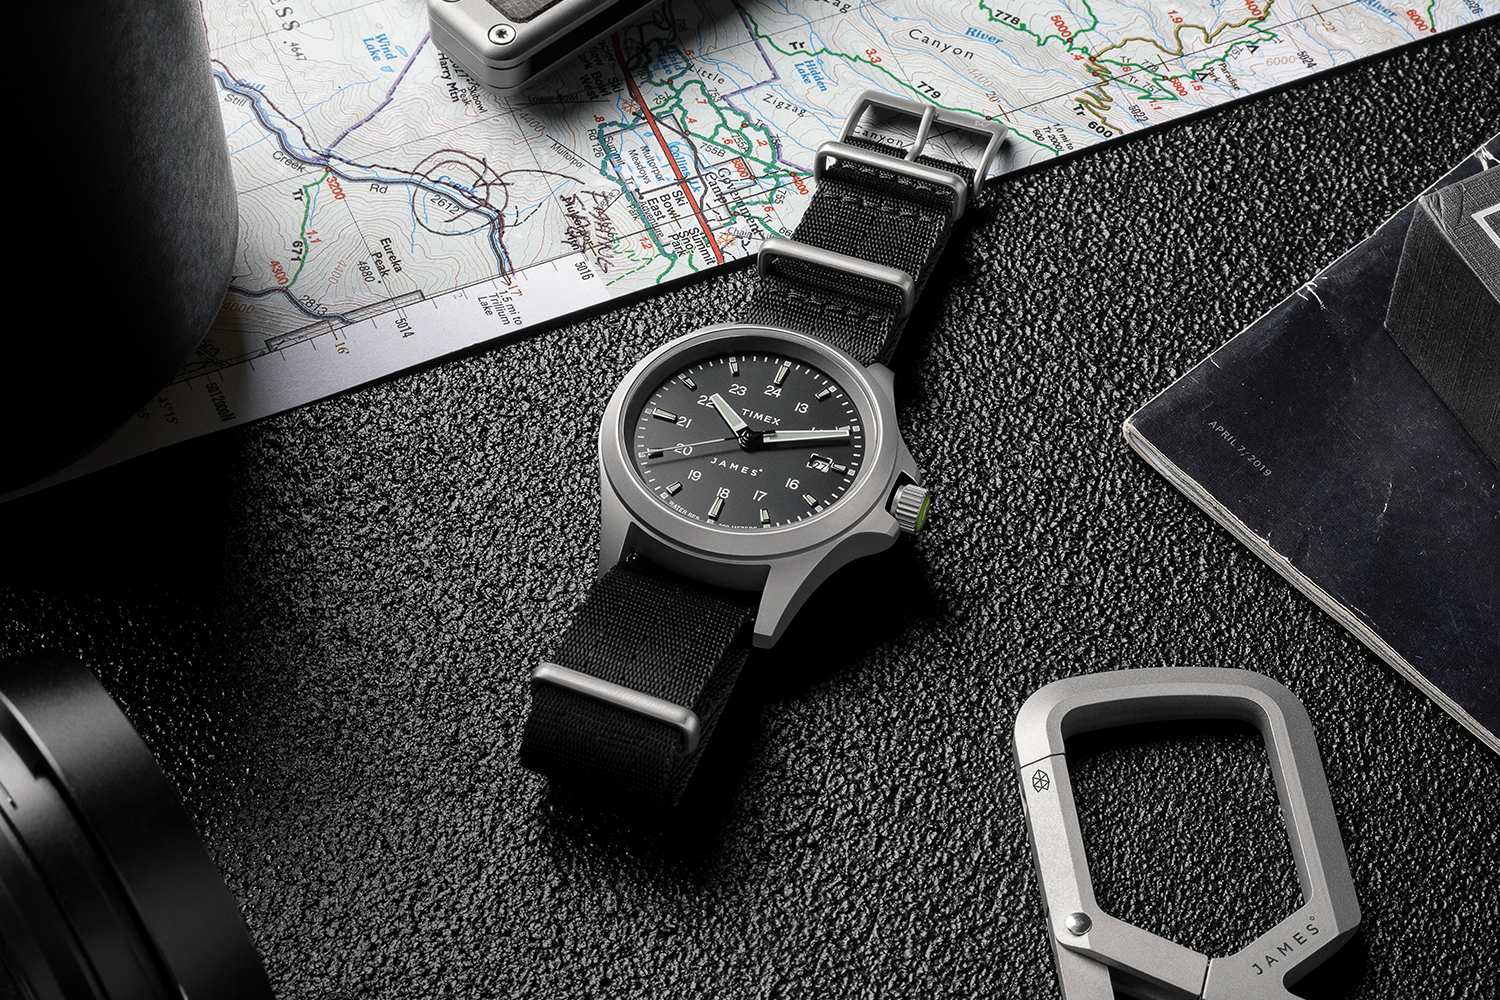 The new automatic watch from The James Brand and Timex lying on a table next to a map, pocketknife, keychain and coffee cup